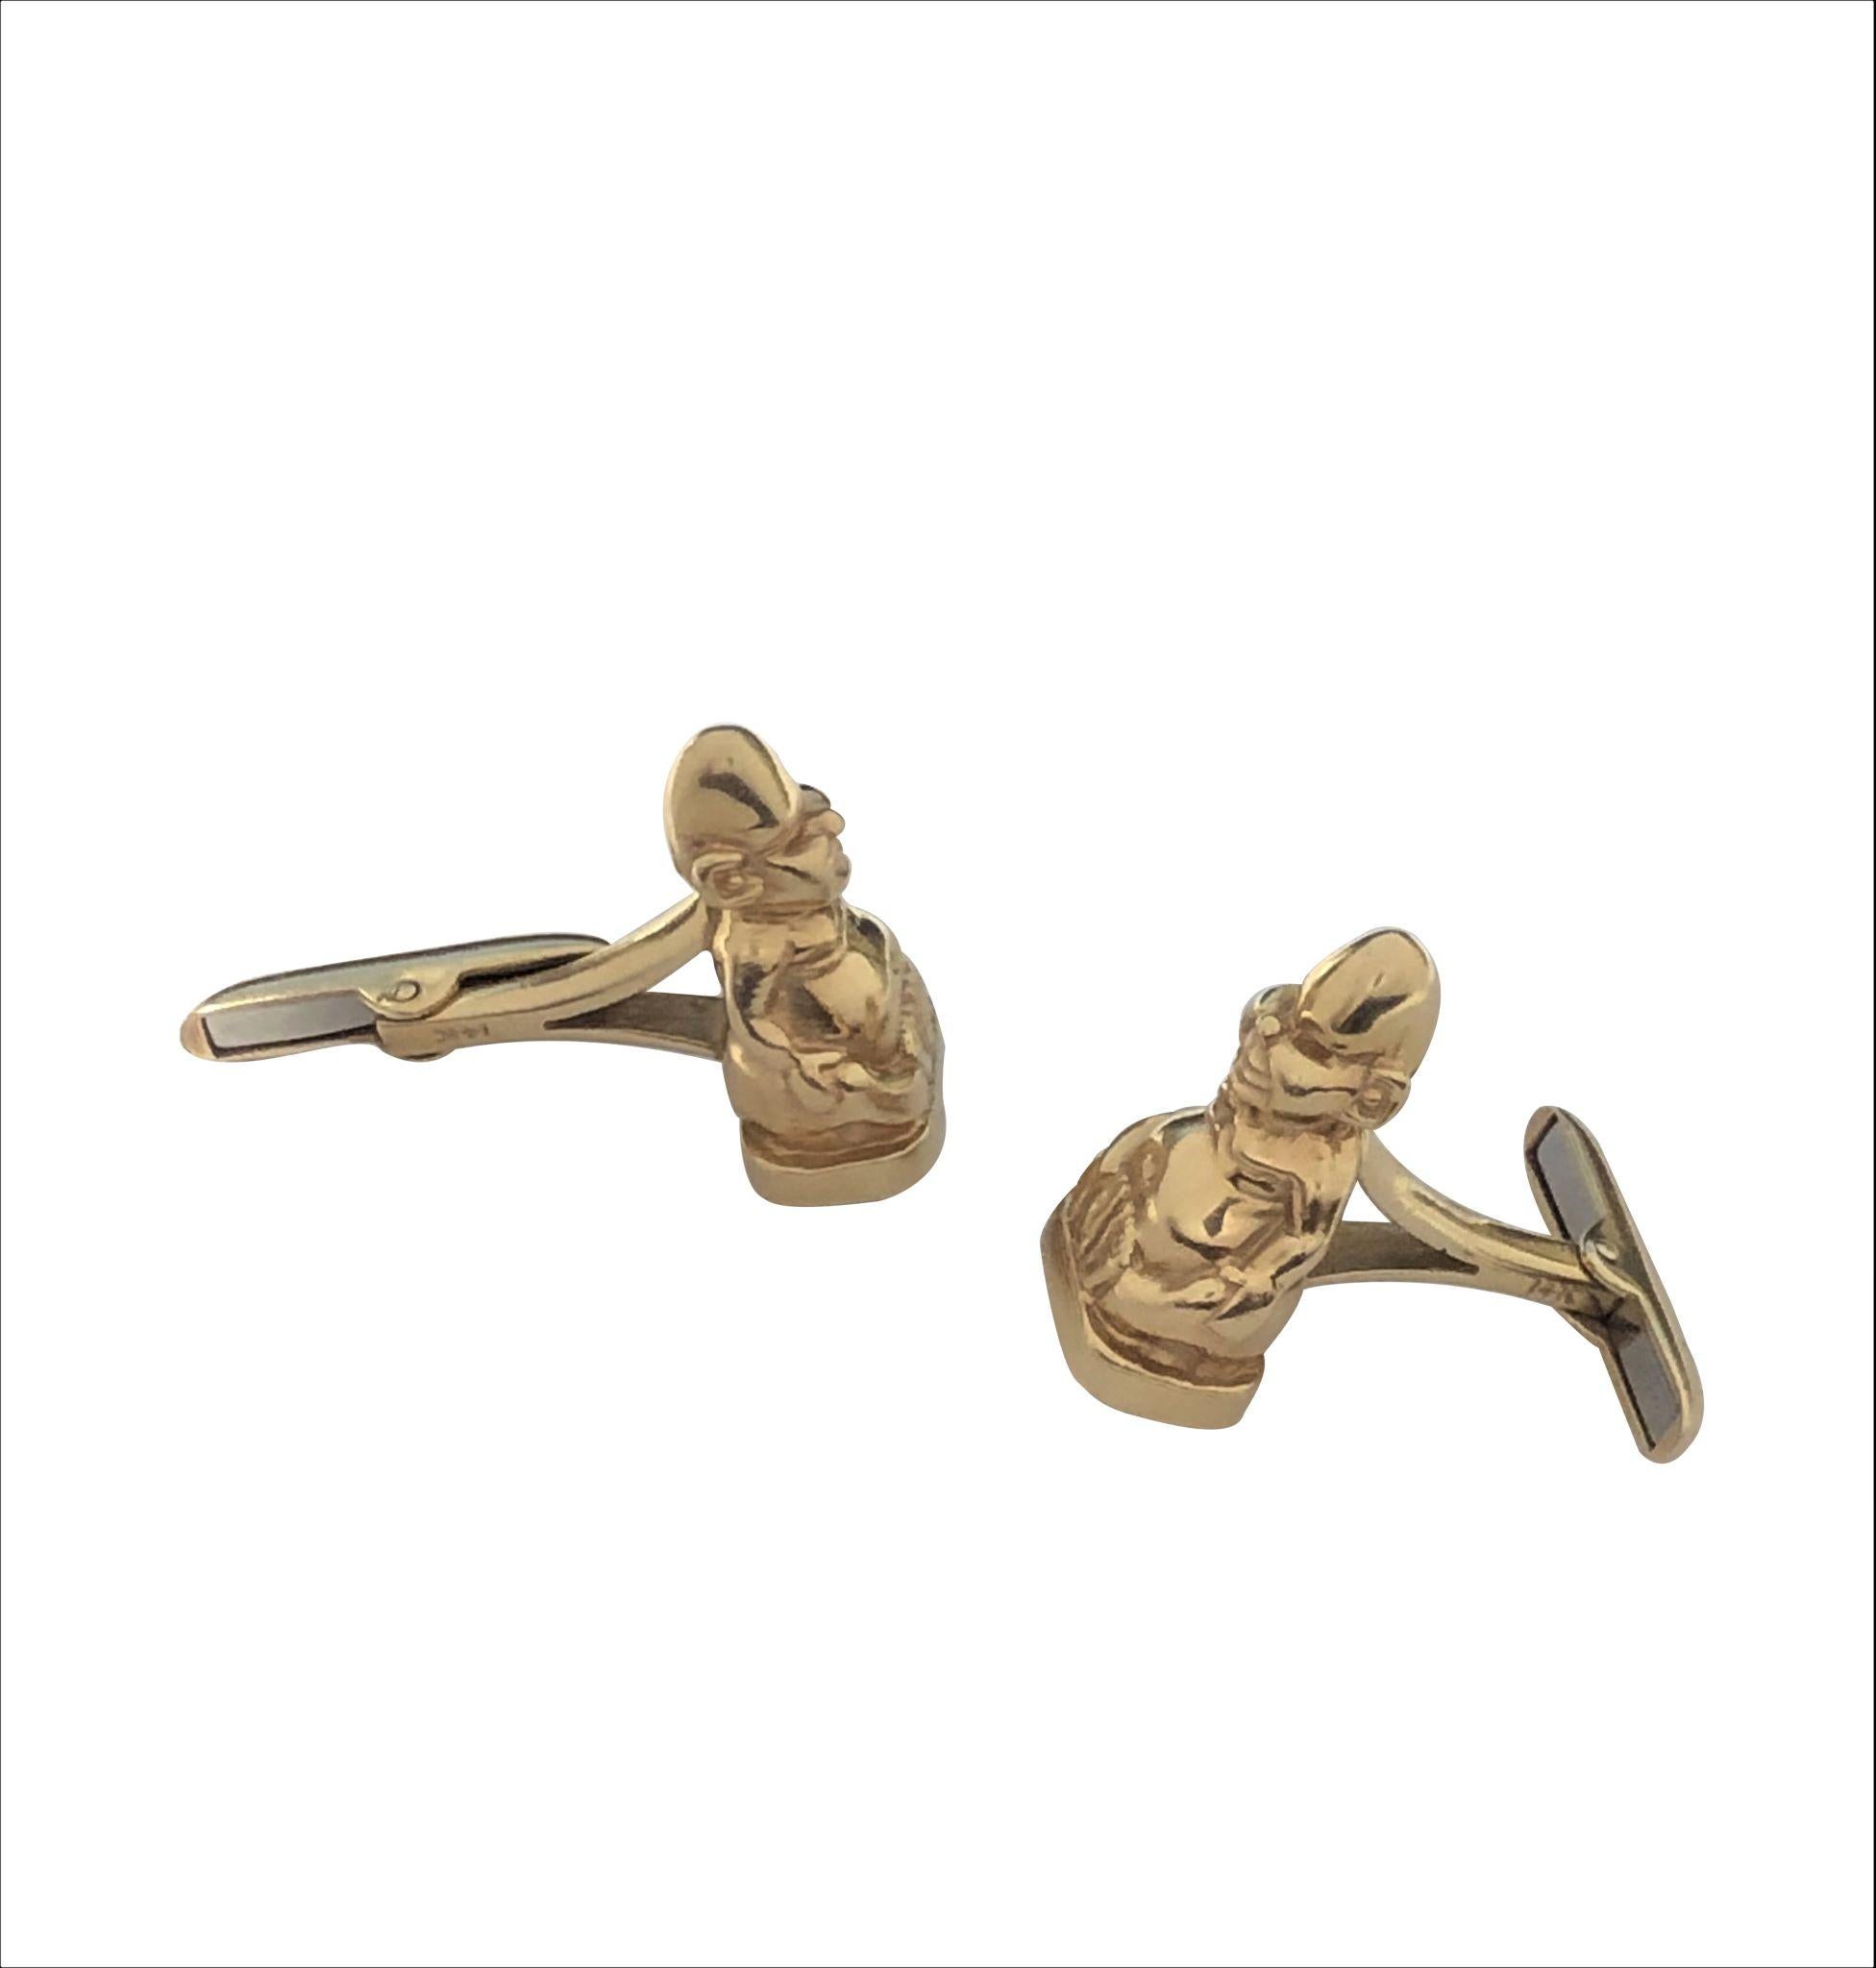 Circa 1959 14K Yellow Gold Cufflinks Gifted to a Family member of Hollywood Icon Bob Hope, Measuring 1 inch in length,  1/2 inch wide and weighing 19 Grams. These very detailed Cufflinks were a Christmas Gift to a Nephew of Bob Hope who resided in